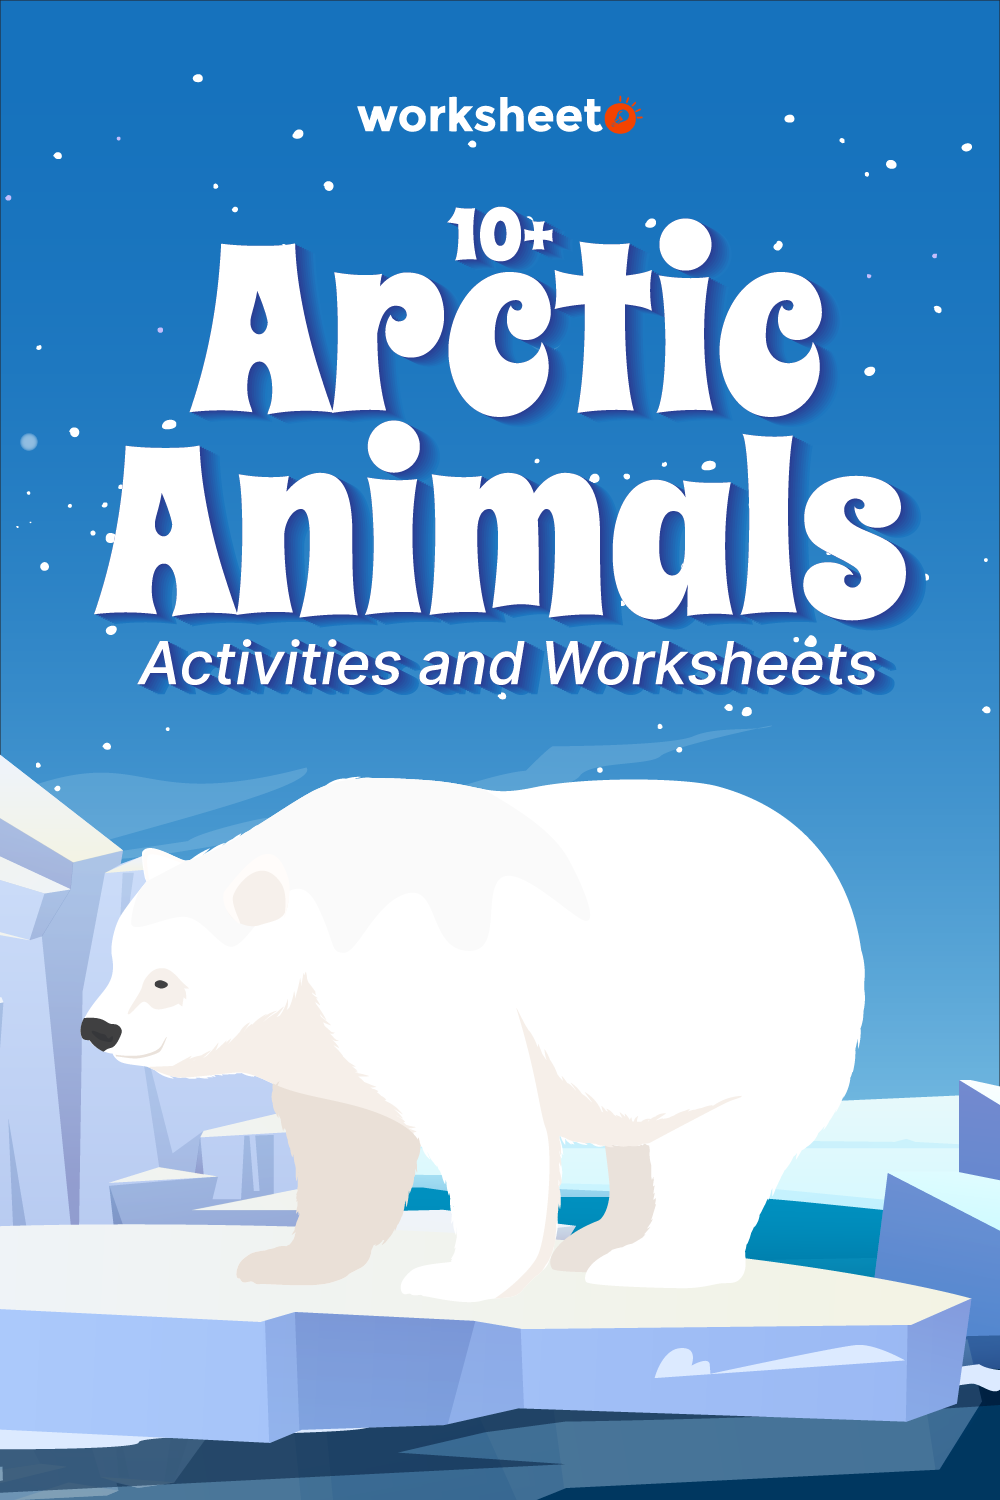 11 Images of Arctic Animals Activities And Worksheets